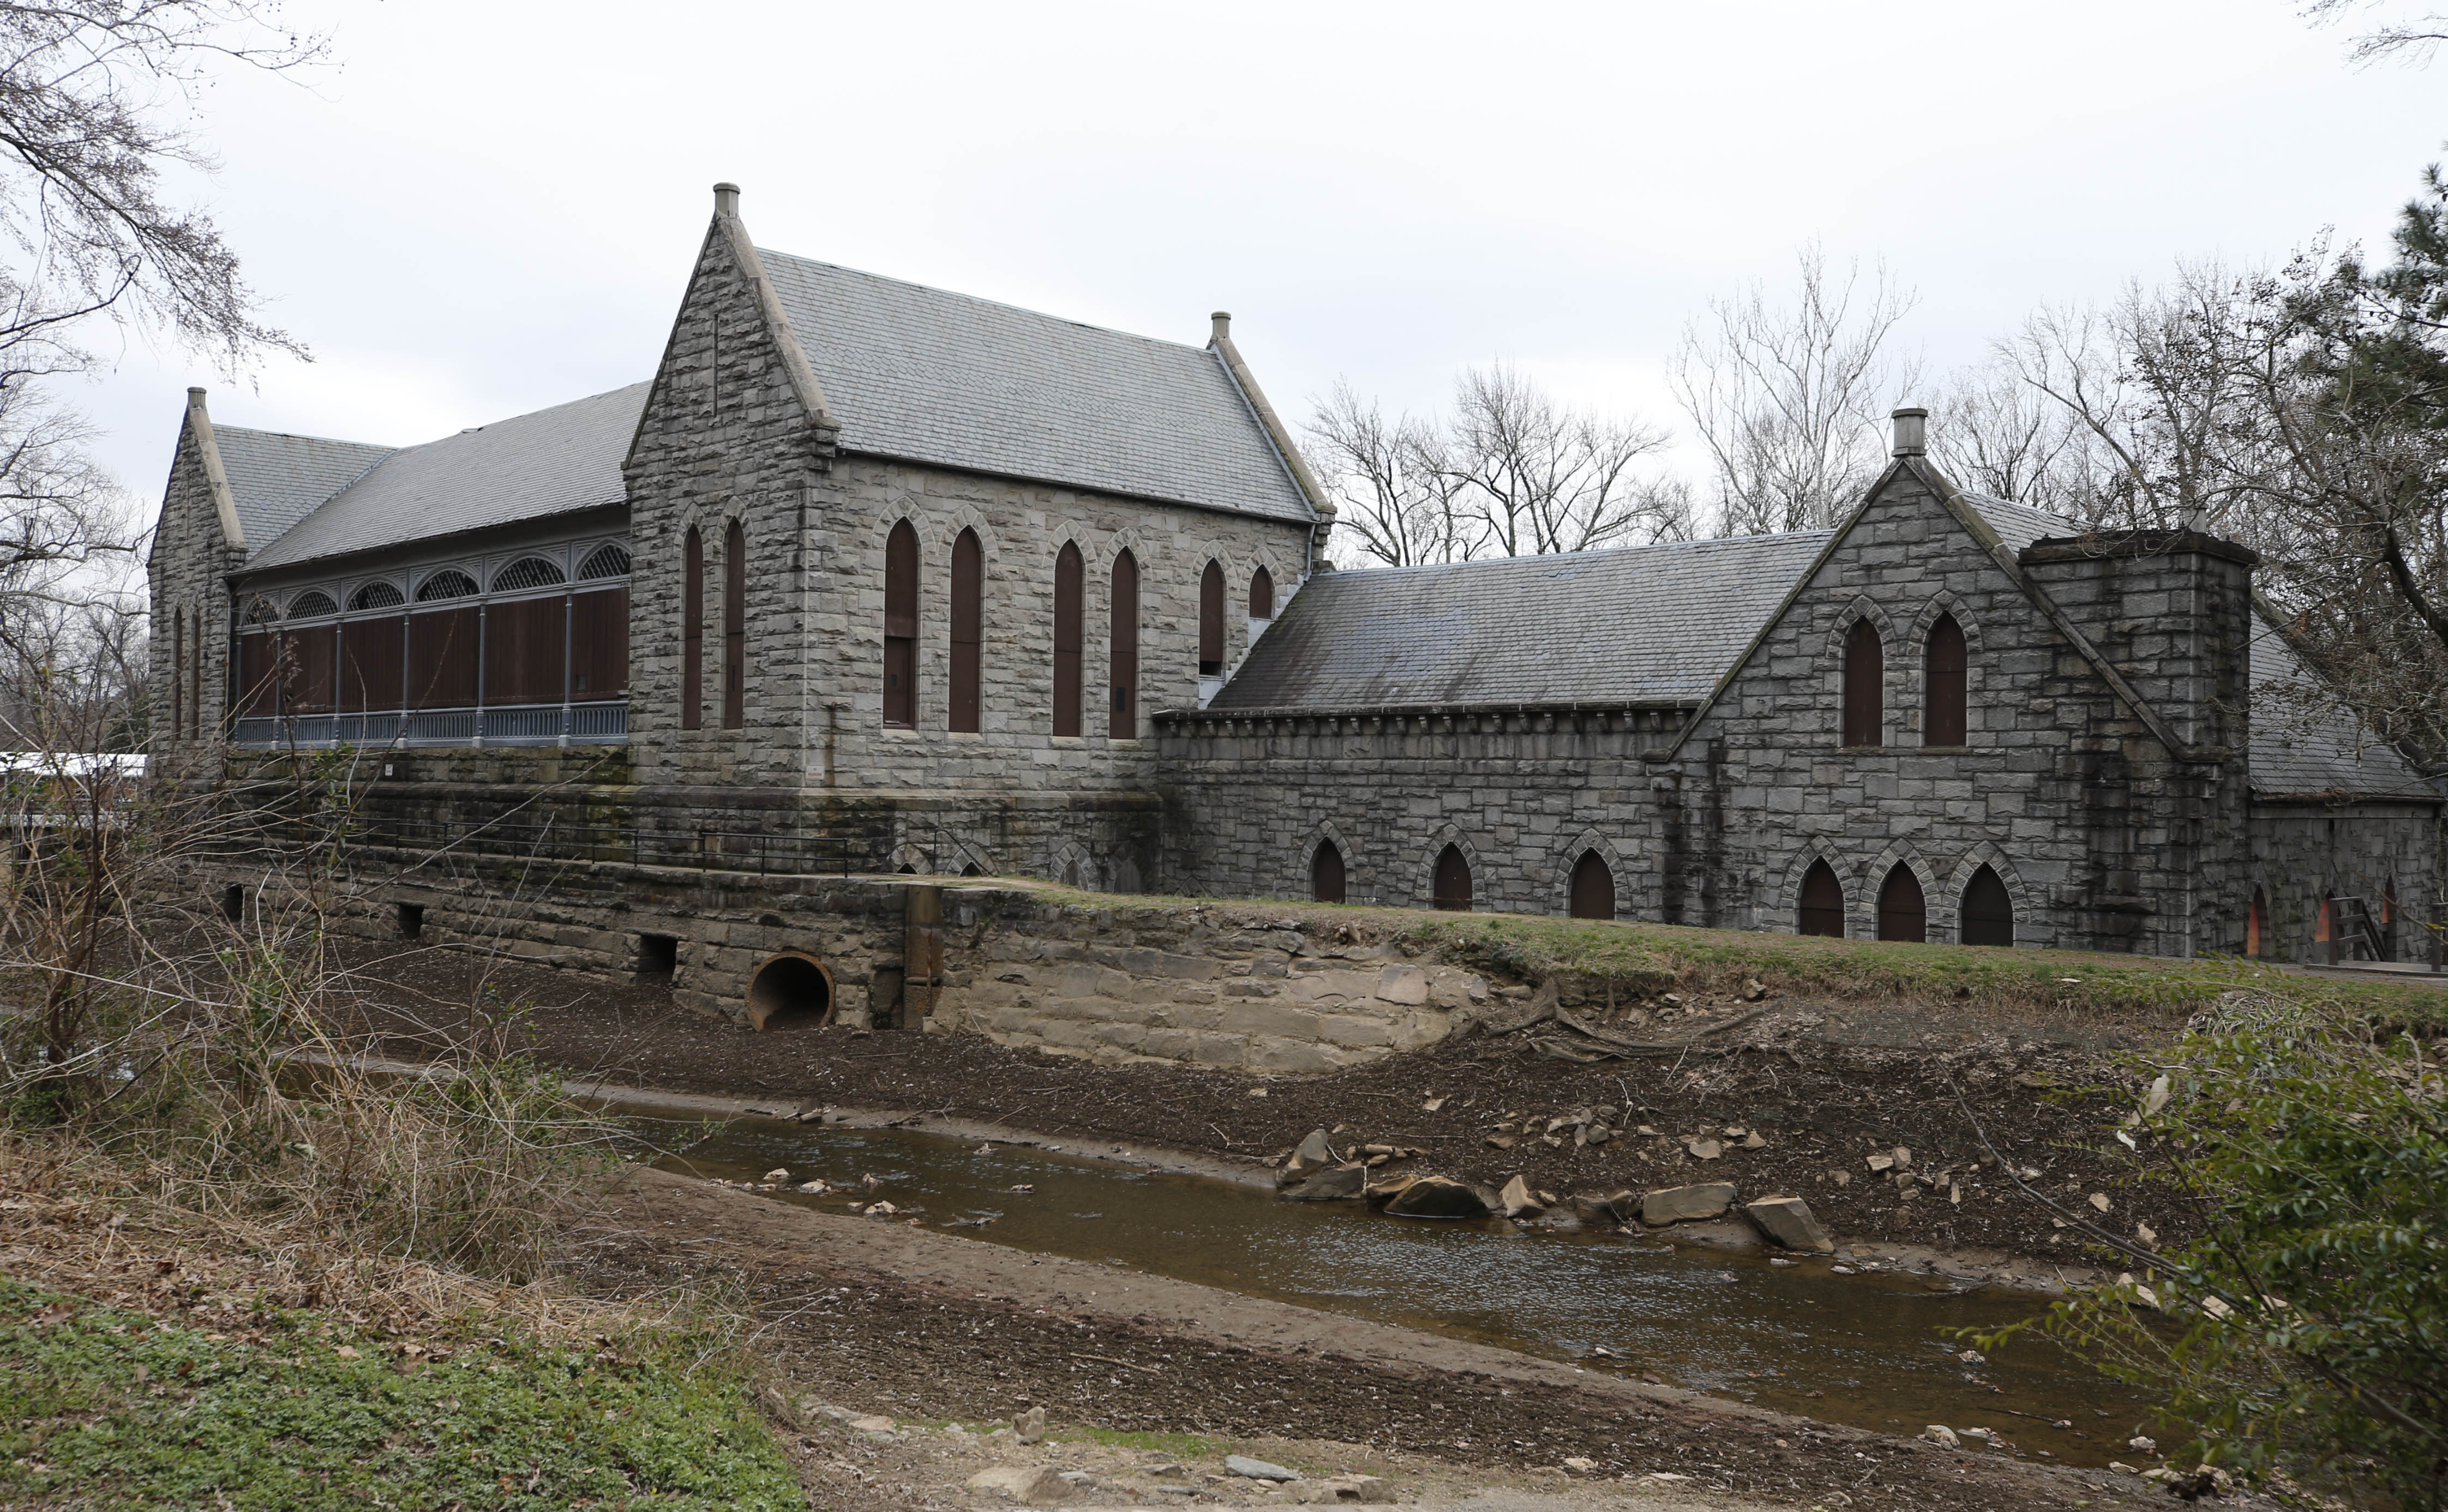 The Pump House is a grand example of Gothic Revival architecture.